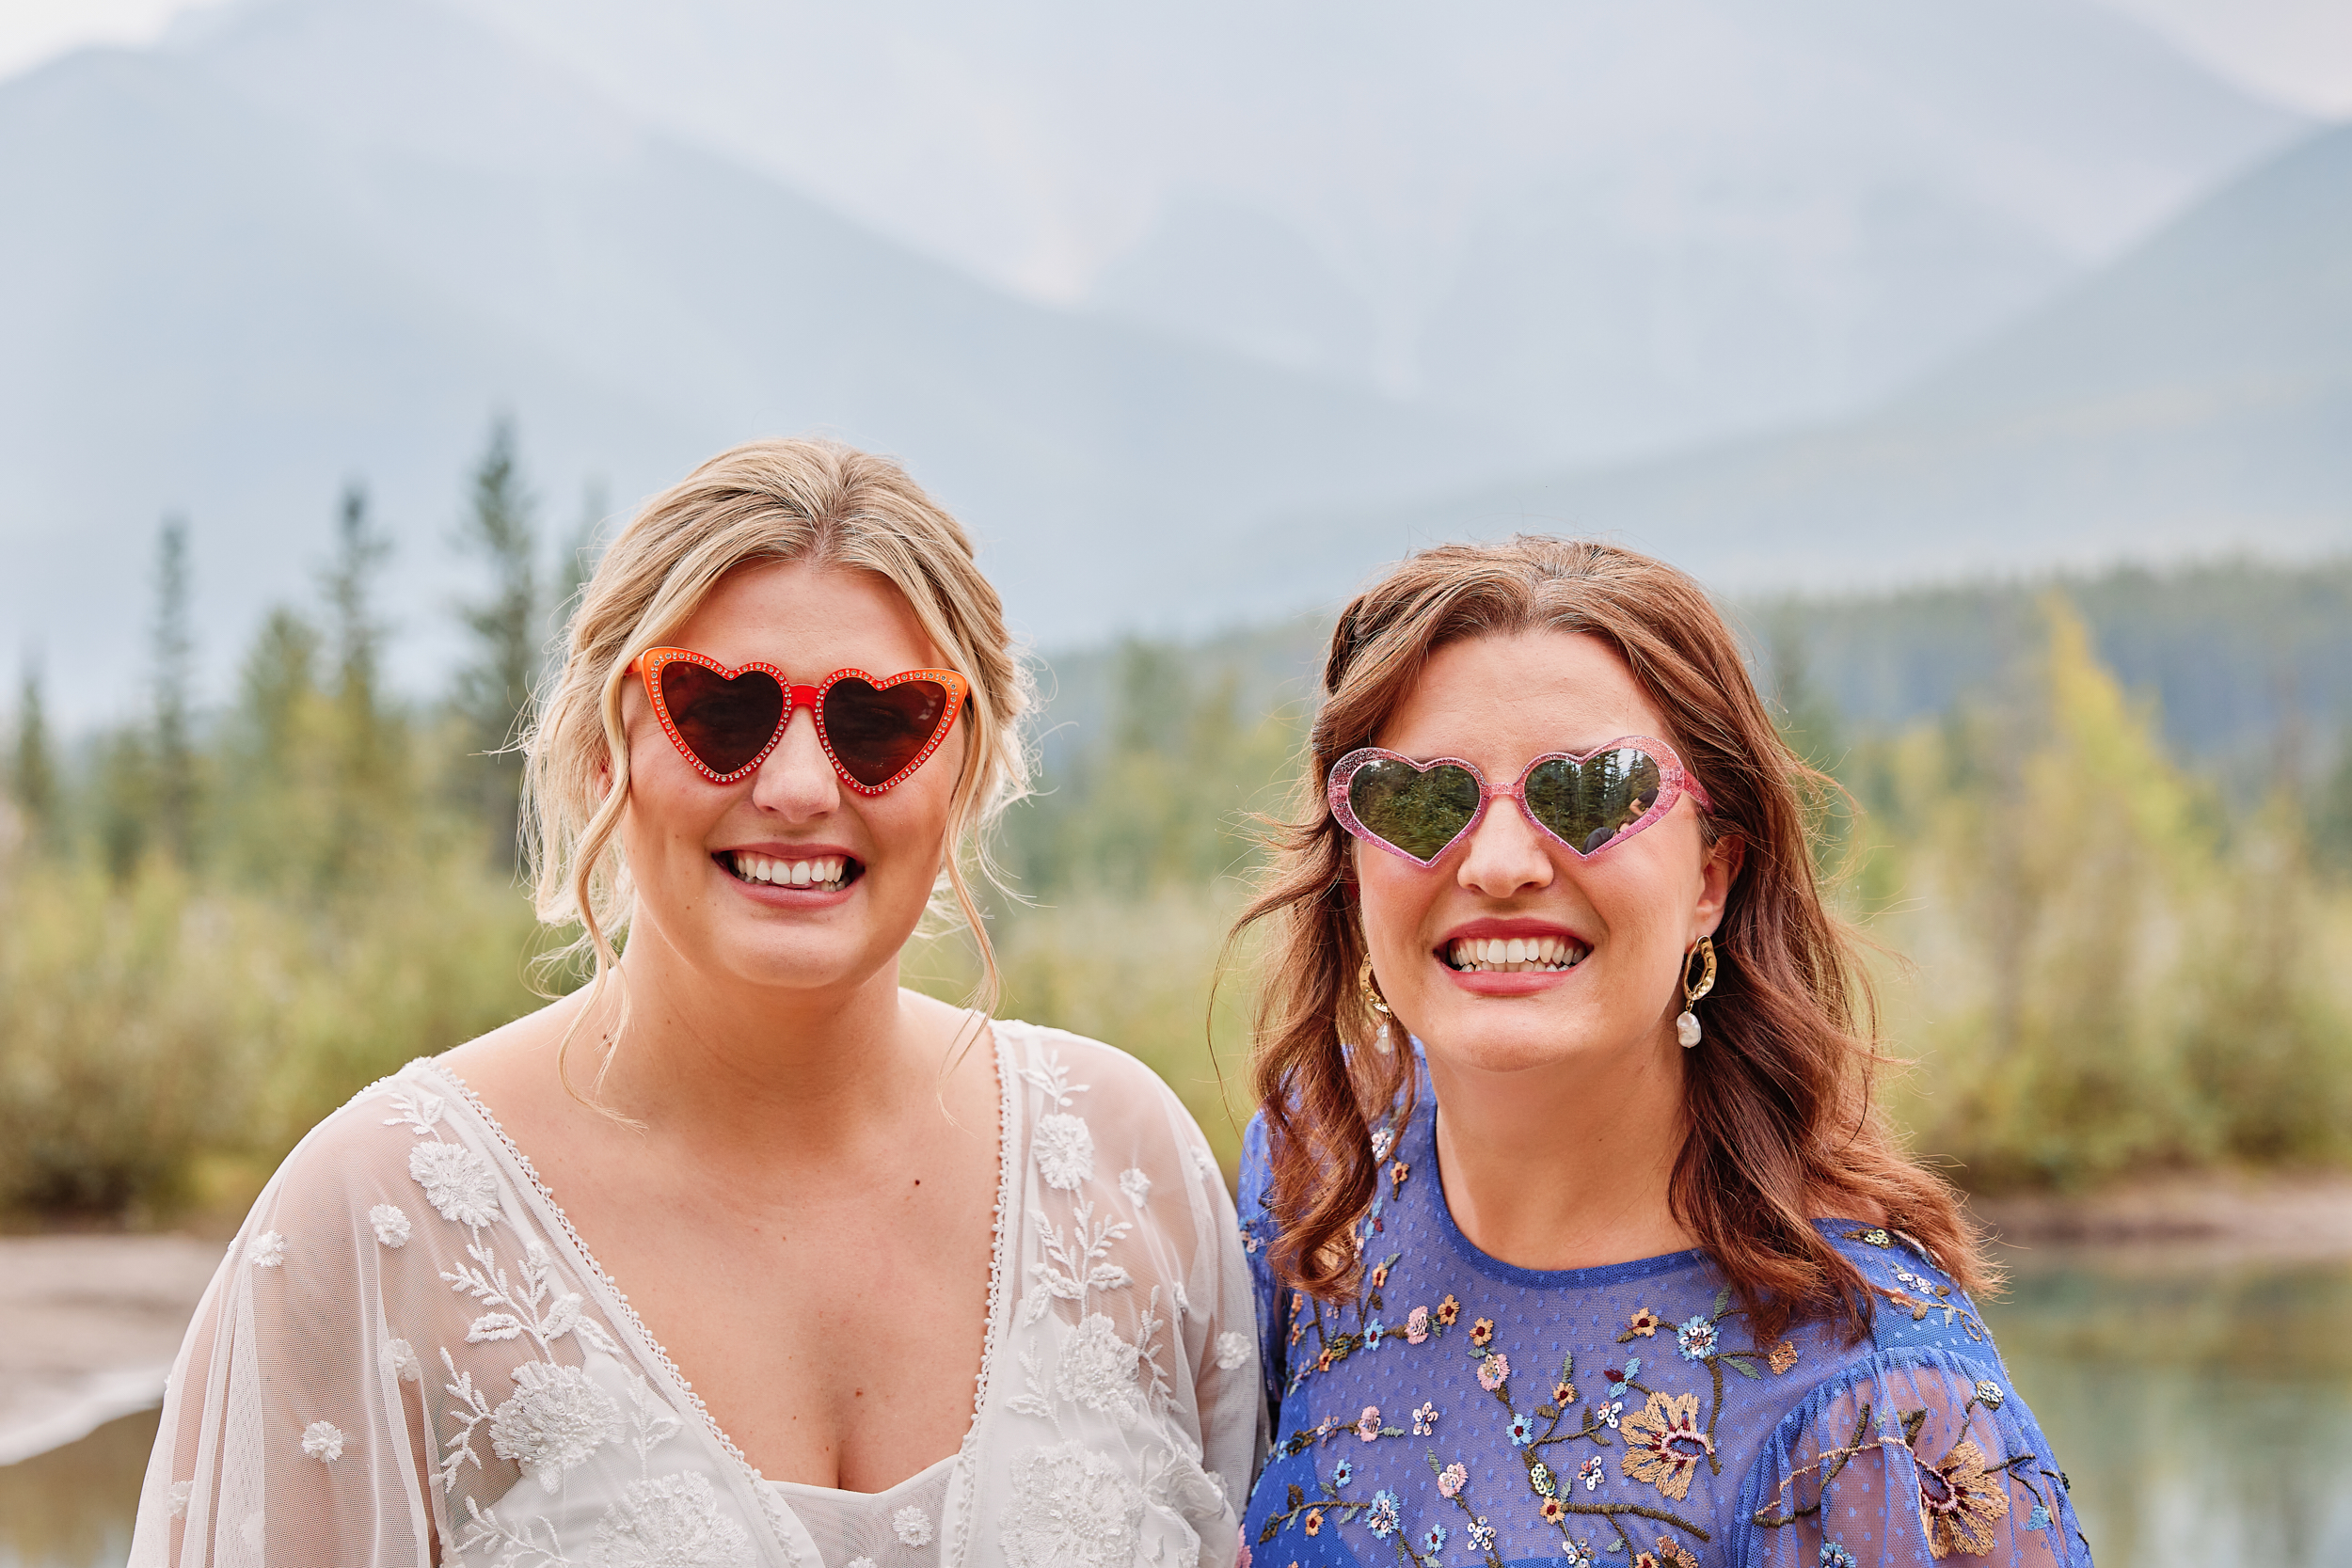 Canmore Elopement Photography